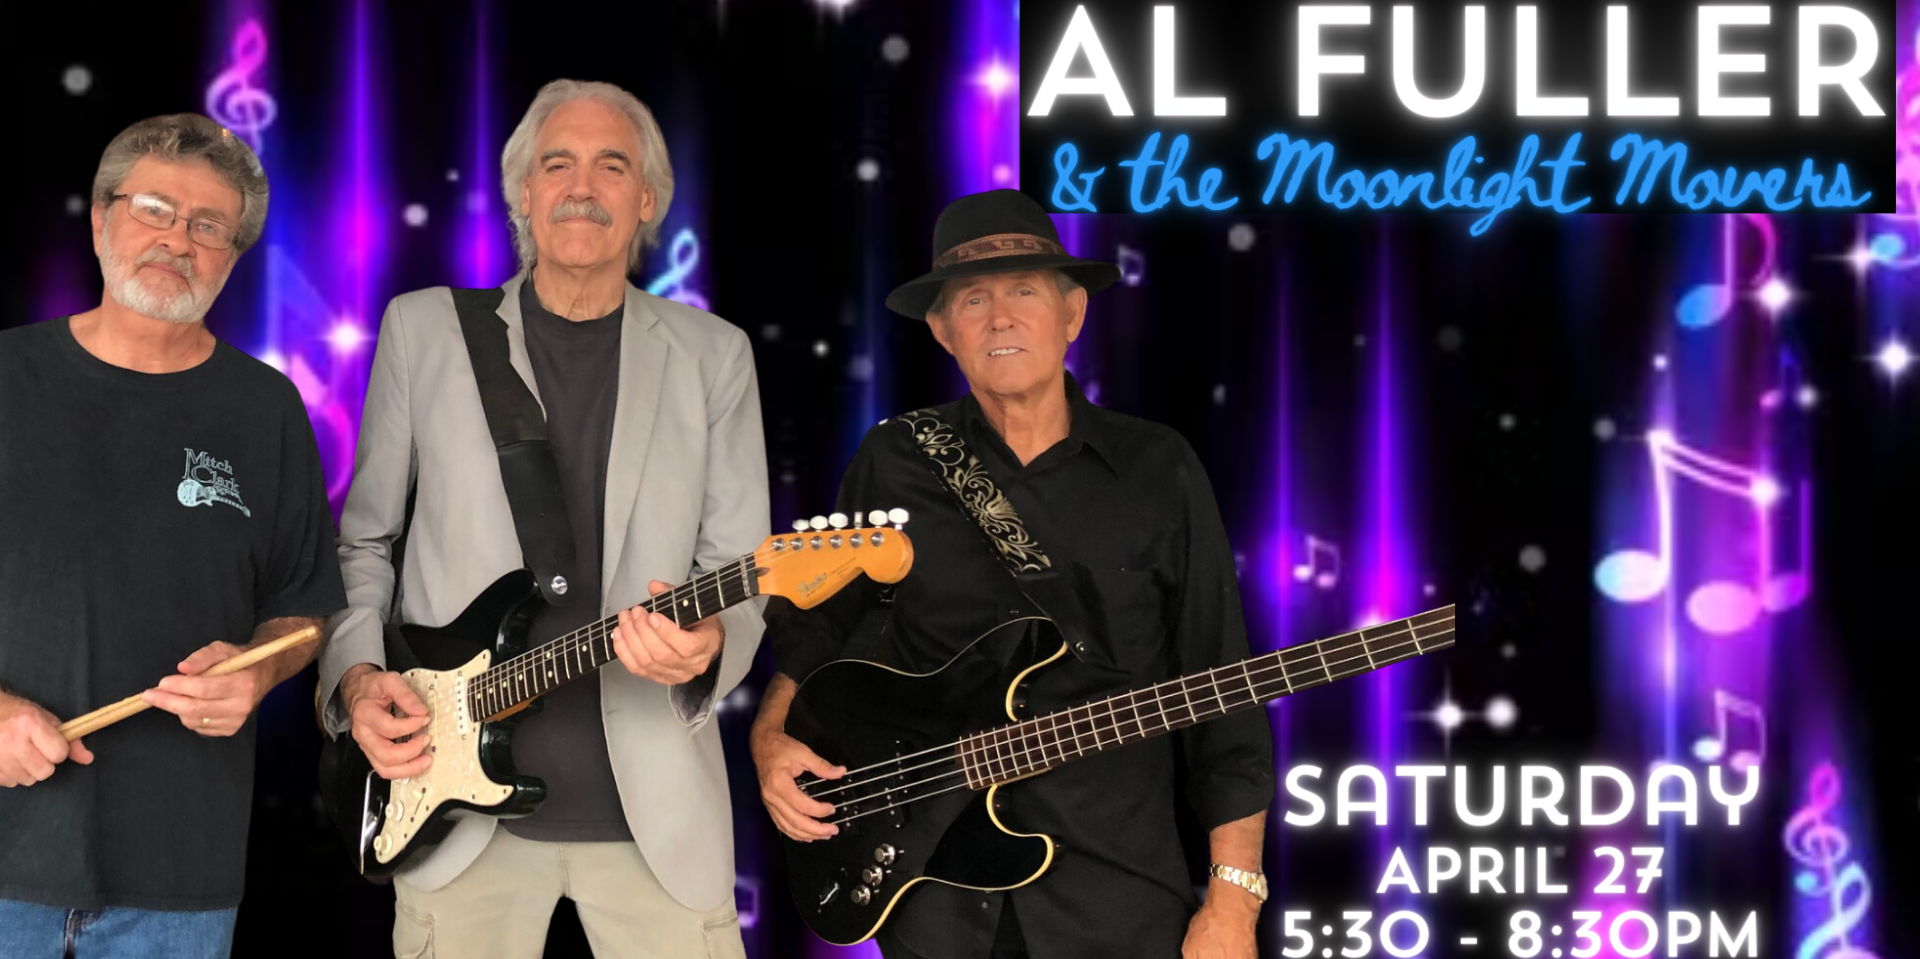 Al Fuller & The Moonlight Movers  promotional image